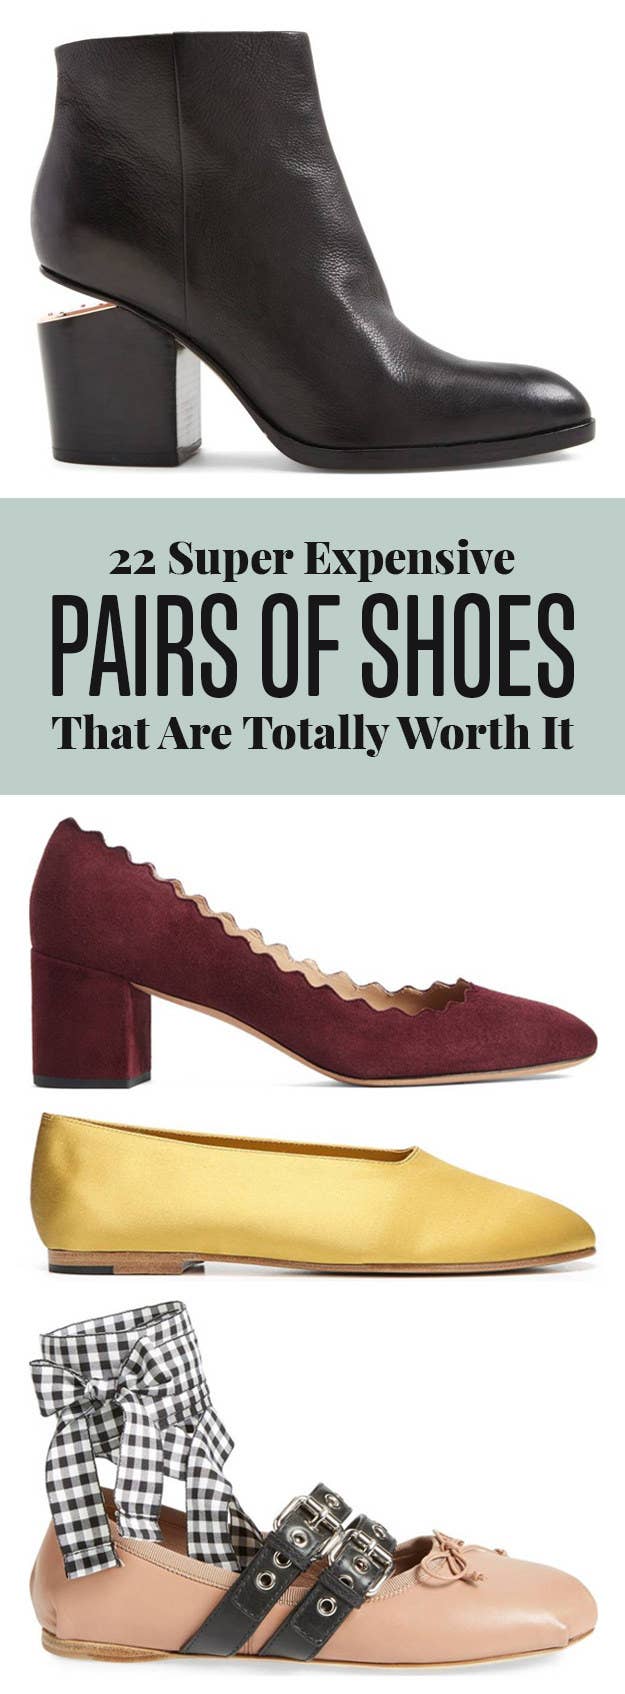 22 Super Expensive Pairs Of Shoes That People Actually Swear By